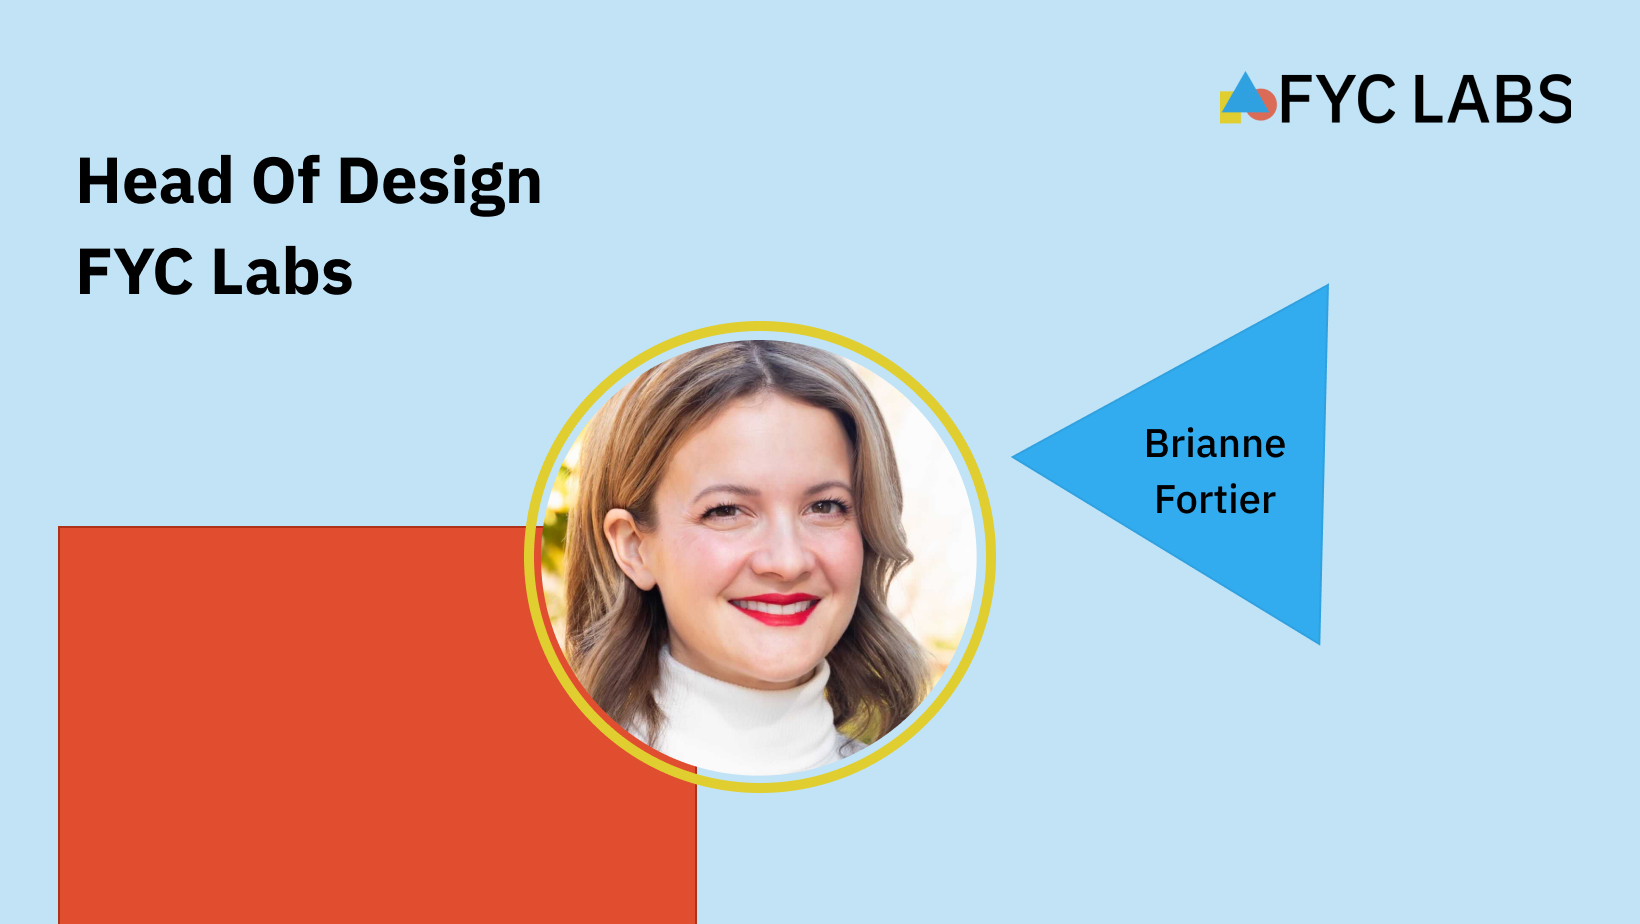 FYC Labs Head of Design - Brianne Fortier